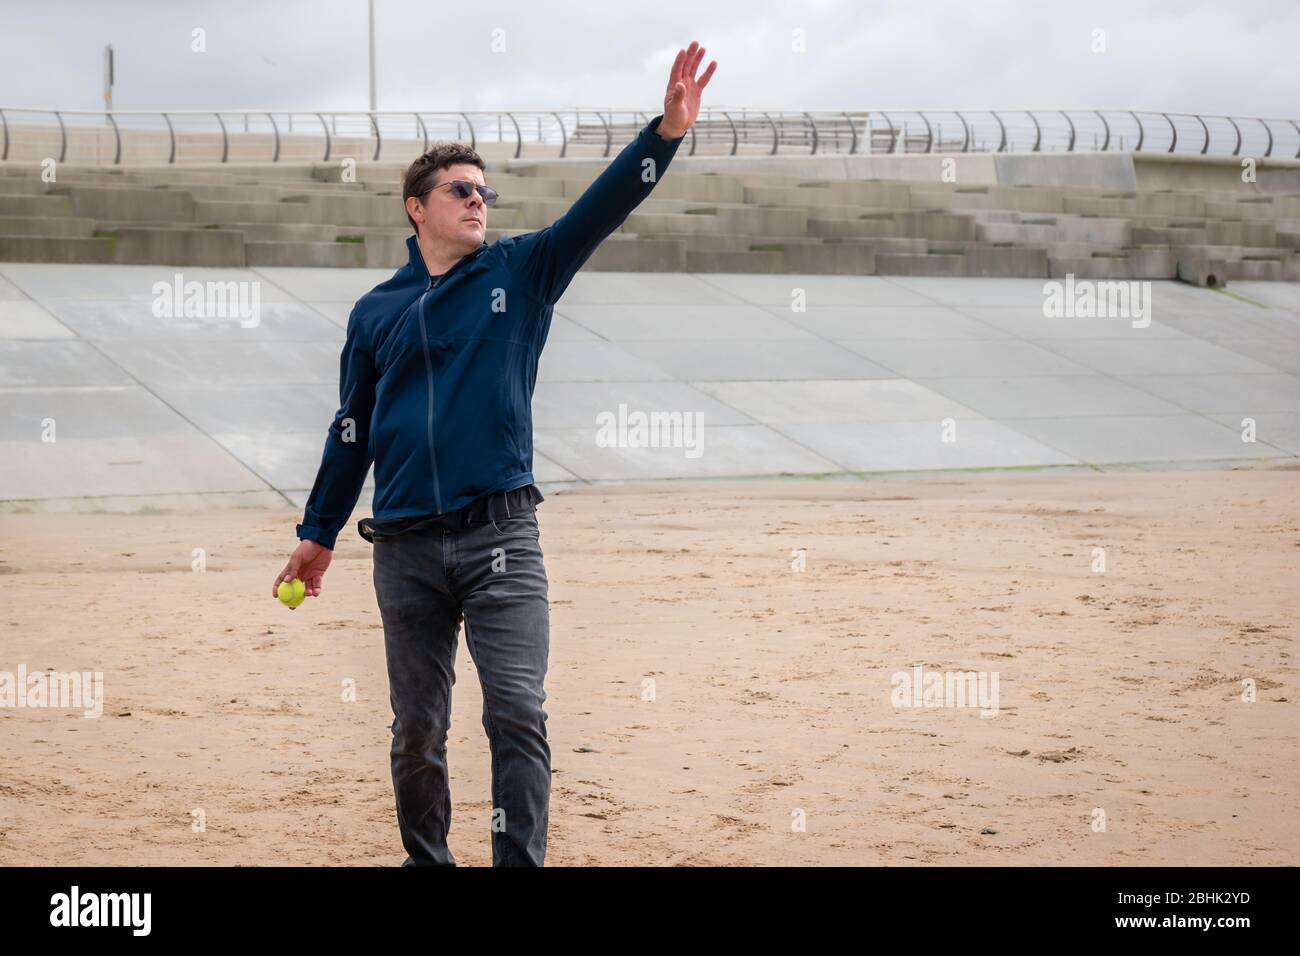 A man in a jacket playing cricket with a tennis ball on the beach Stock Photo